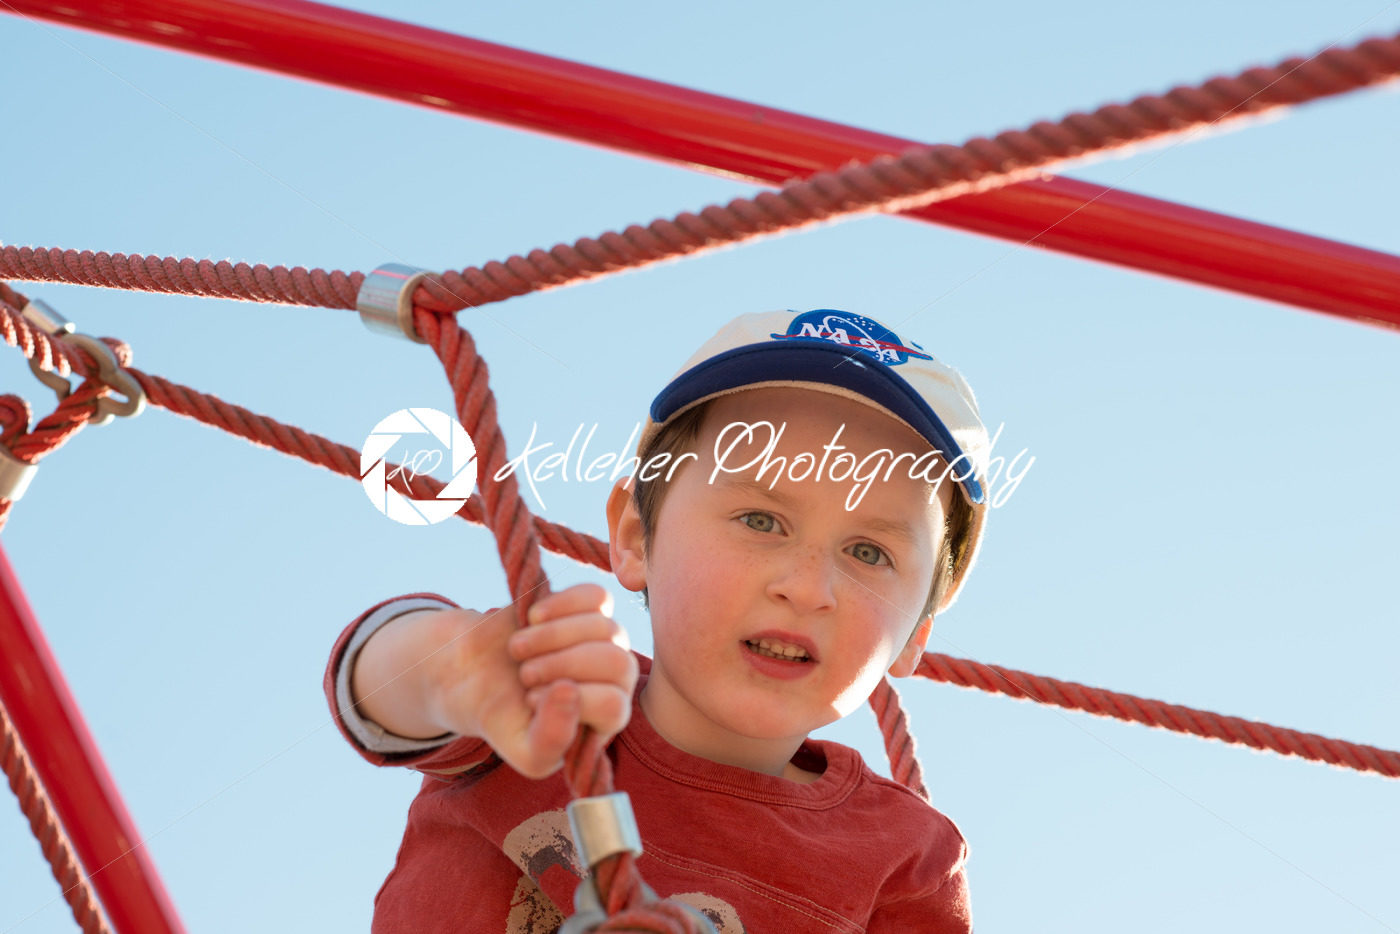 Young boy child playing at outdoor playground climbing net - Kelleher Photography Store